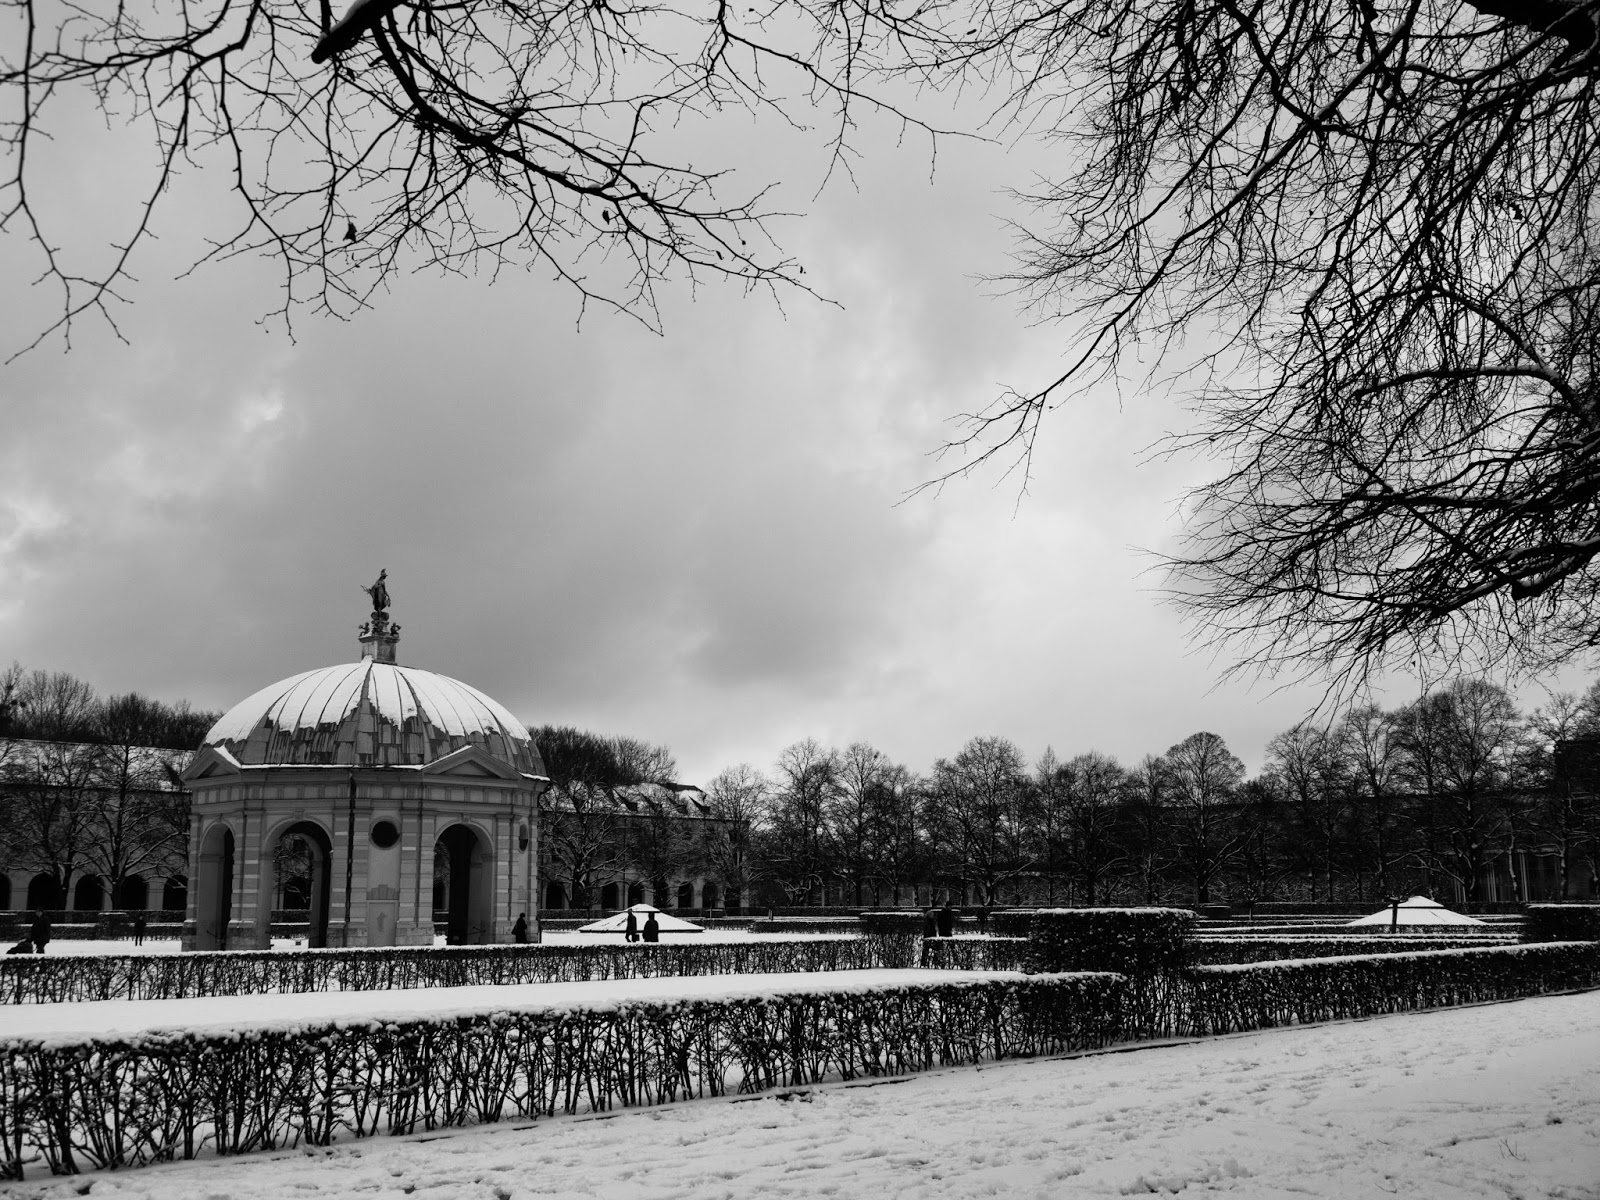 winter in munich hofgarten - - MAHO on Earth Boutique Adventure Tours and Travel Blog